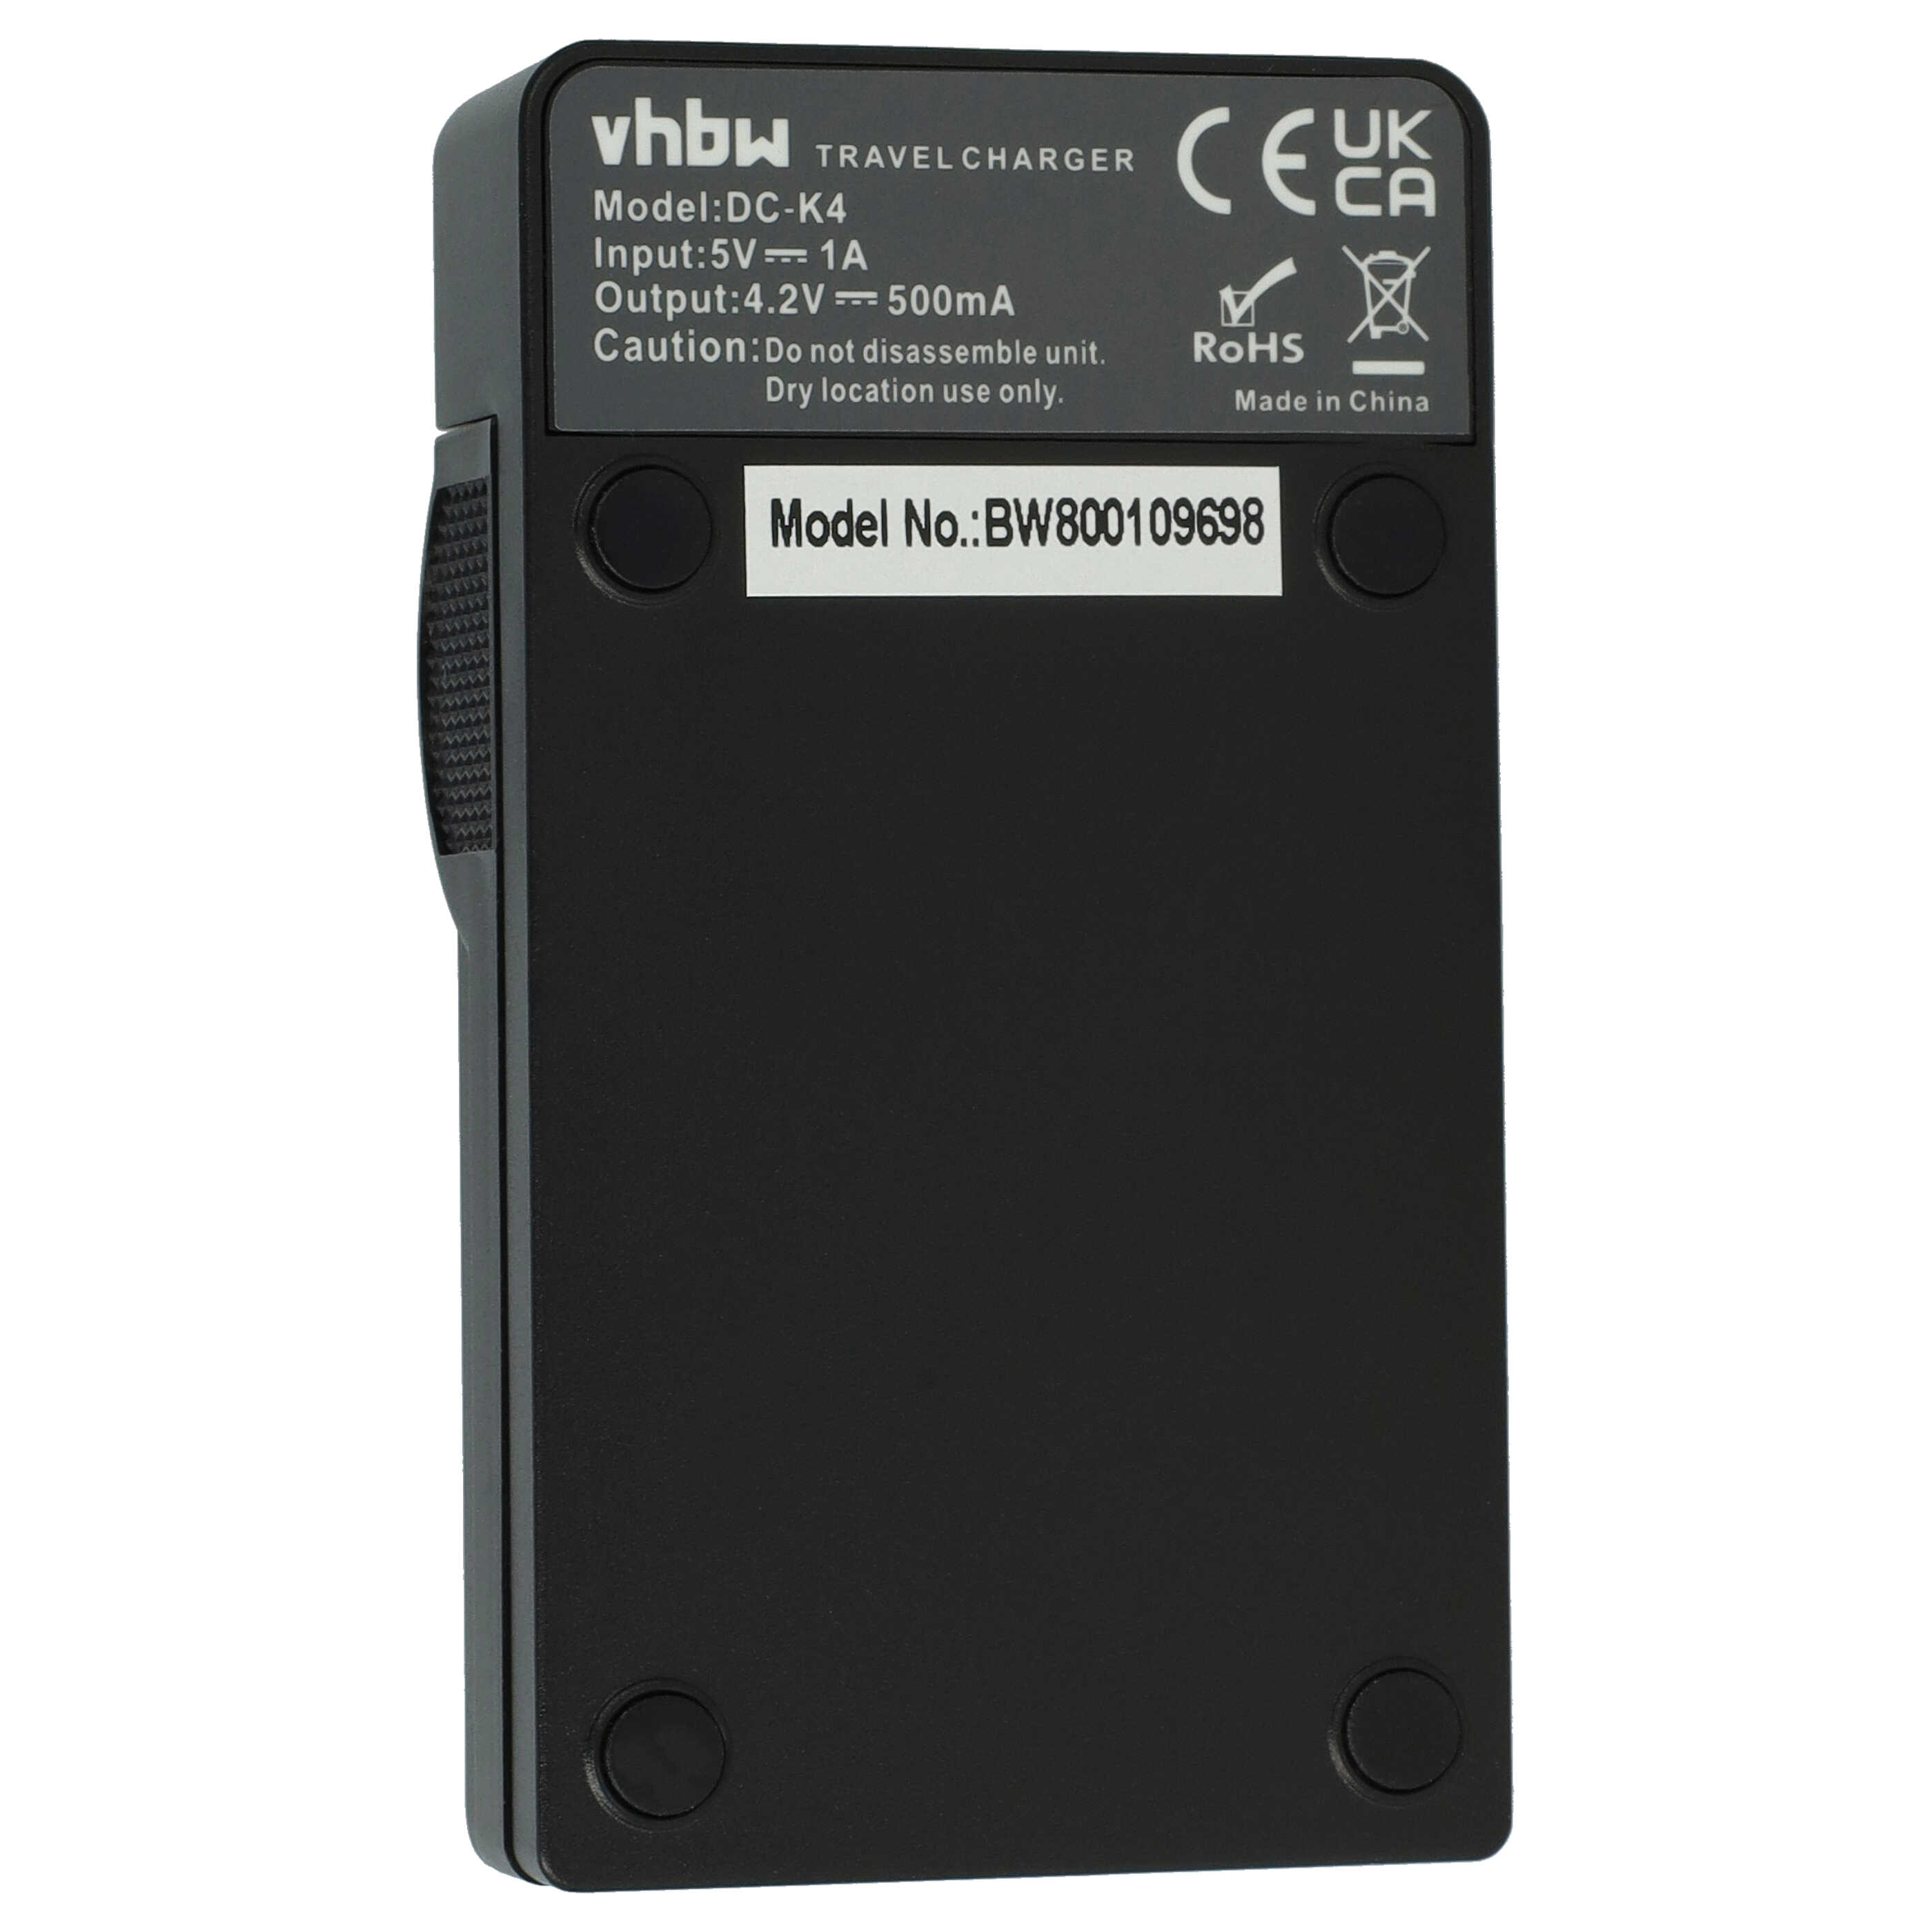 Battery Charger suitable for Casio NP-90 Camera etc. - 0.5 A, 4.2 V